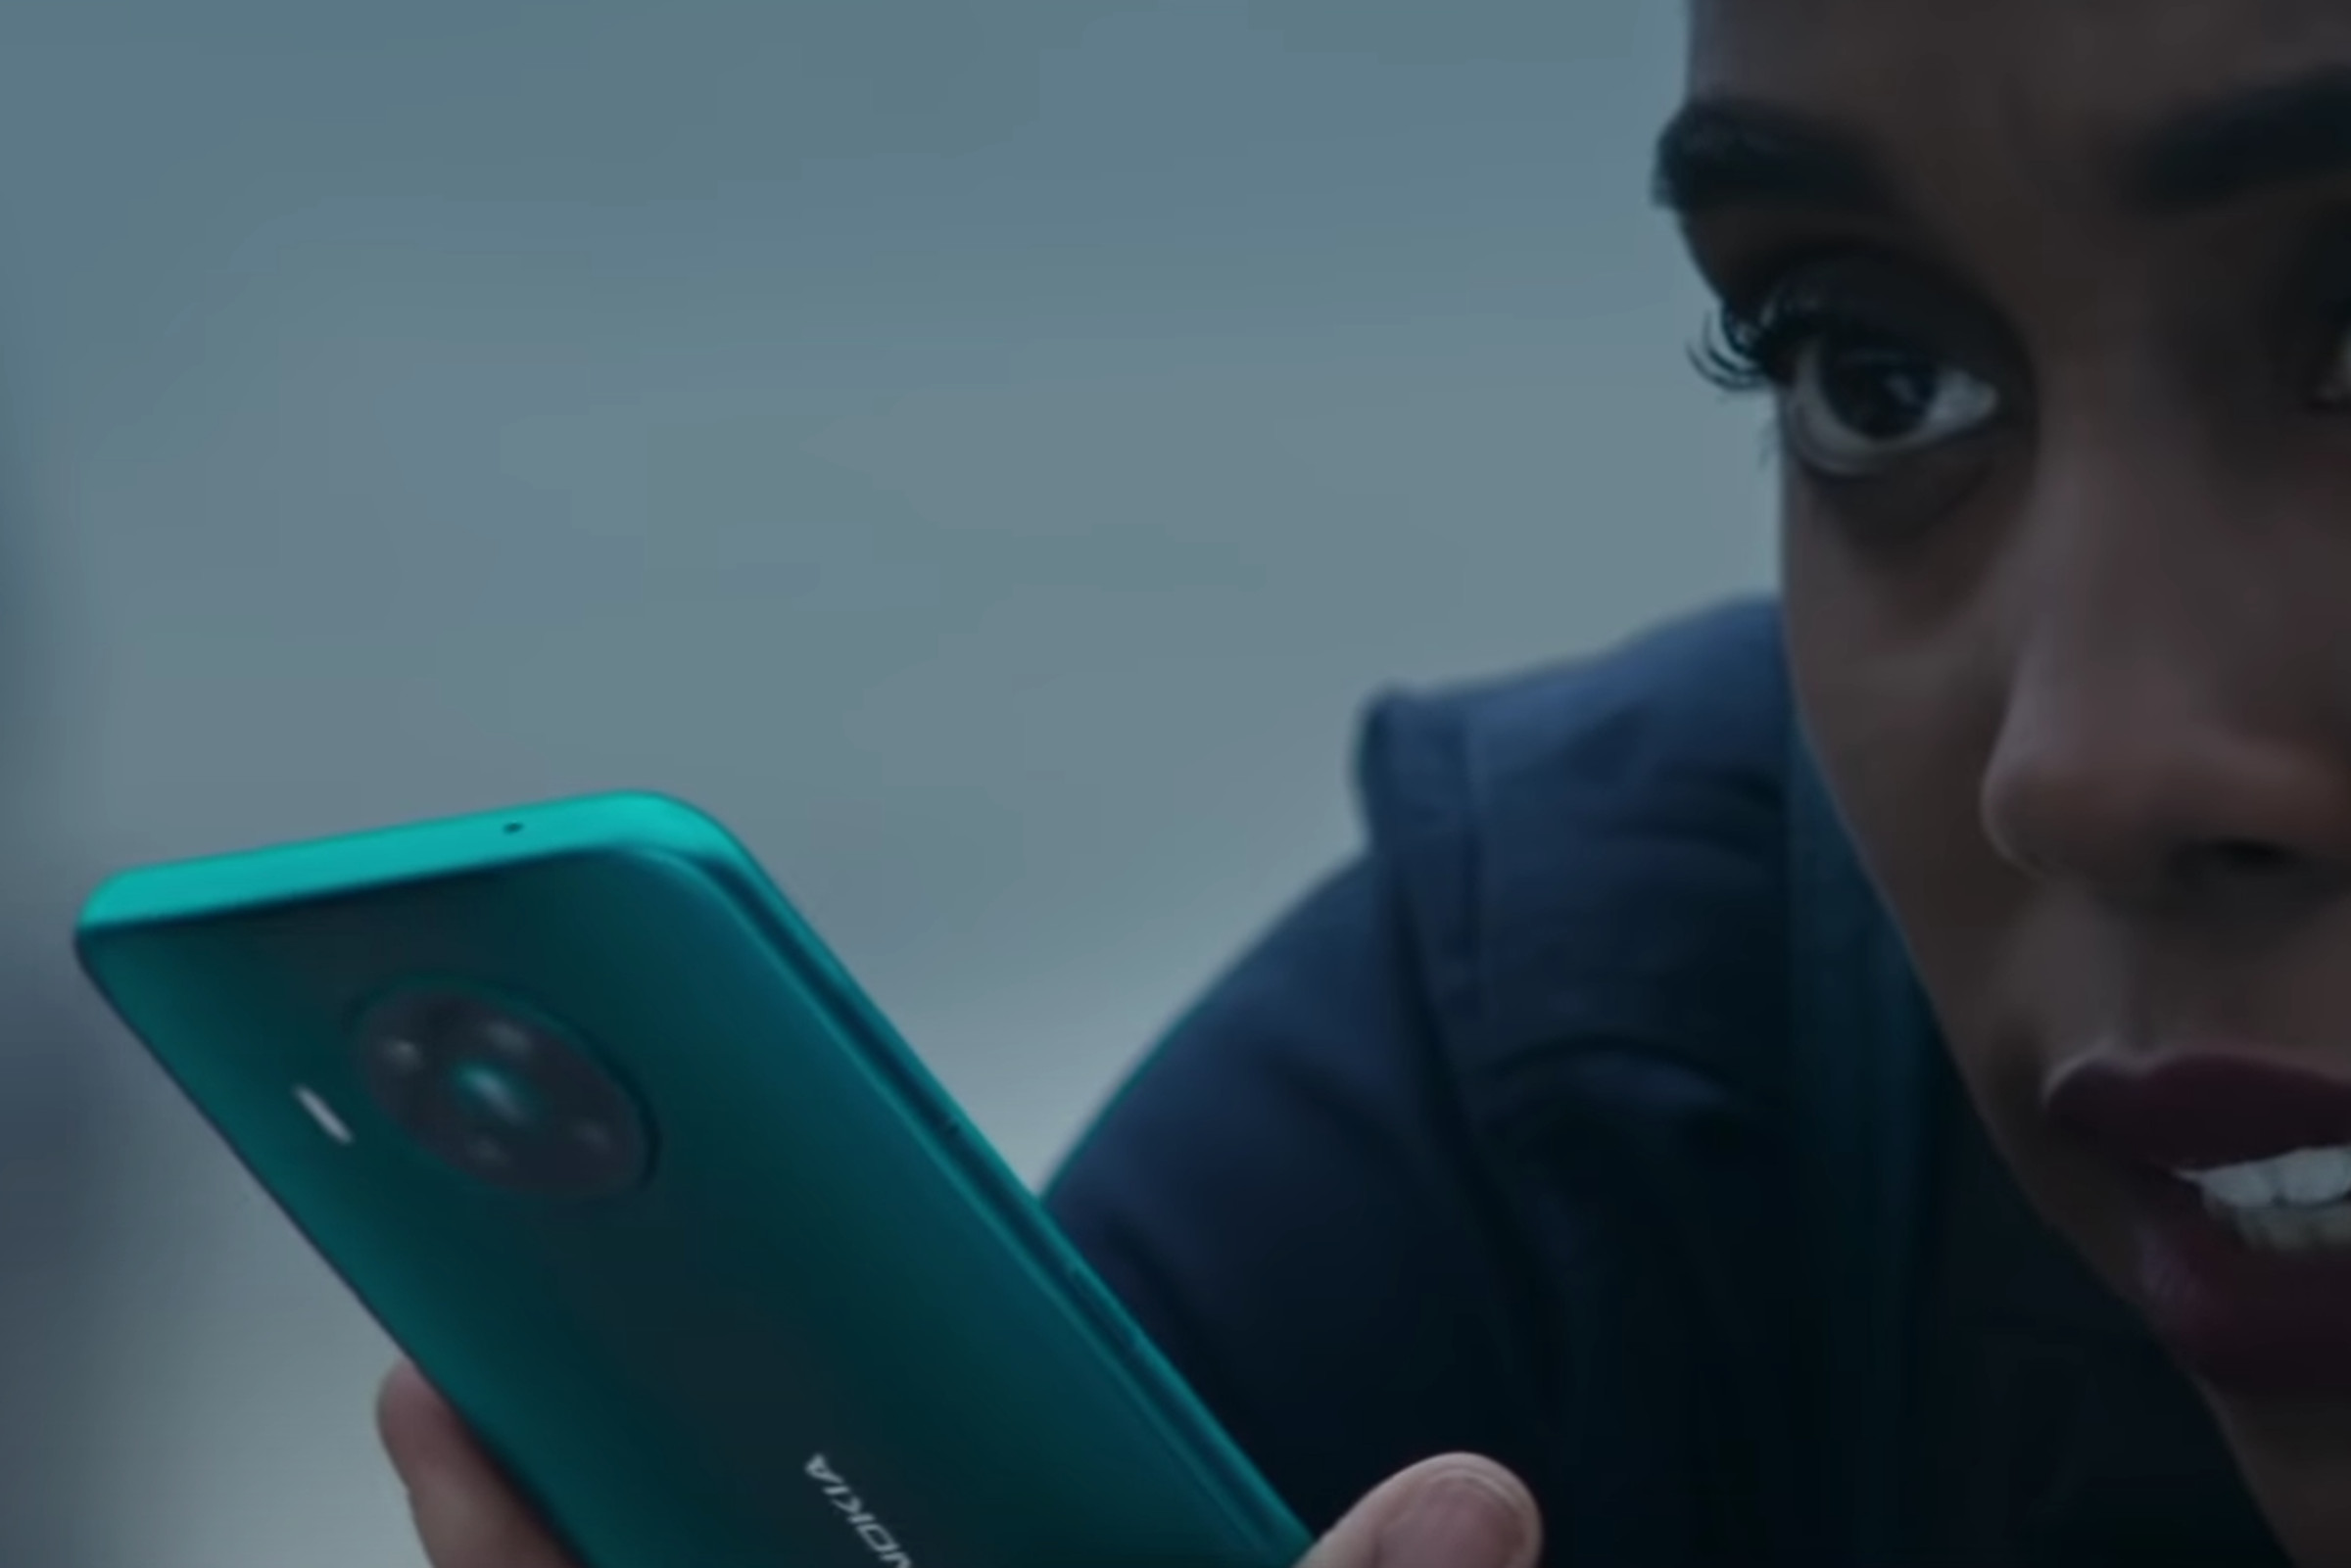 The same footage in the September 2020 version, where the phone resembles a Nokia 8.3 5G.